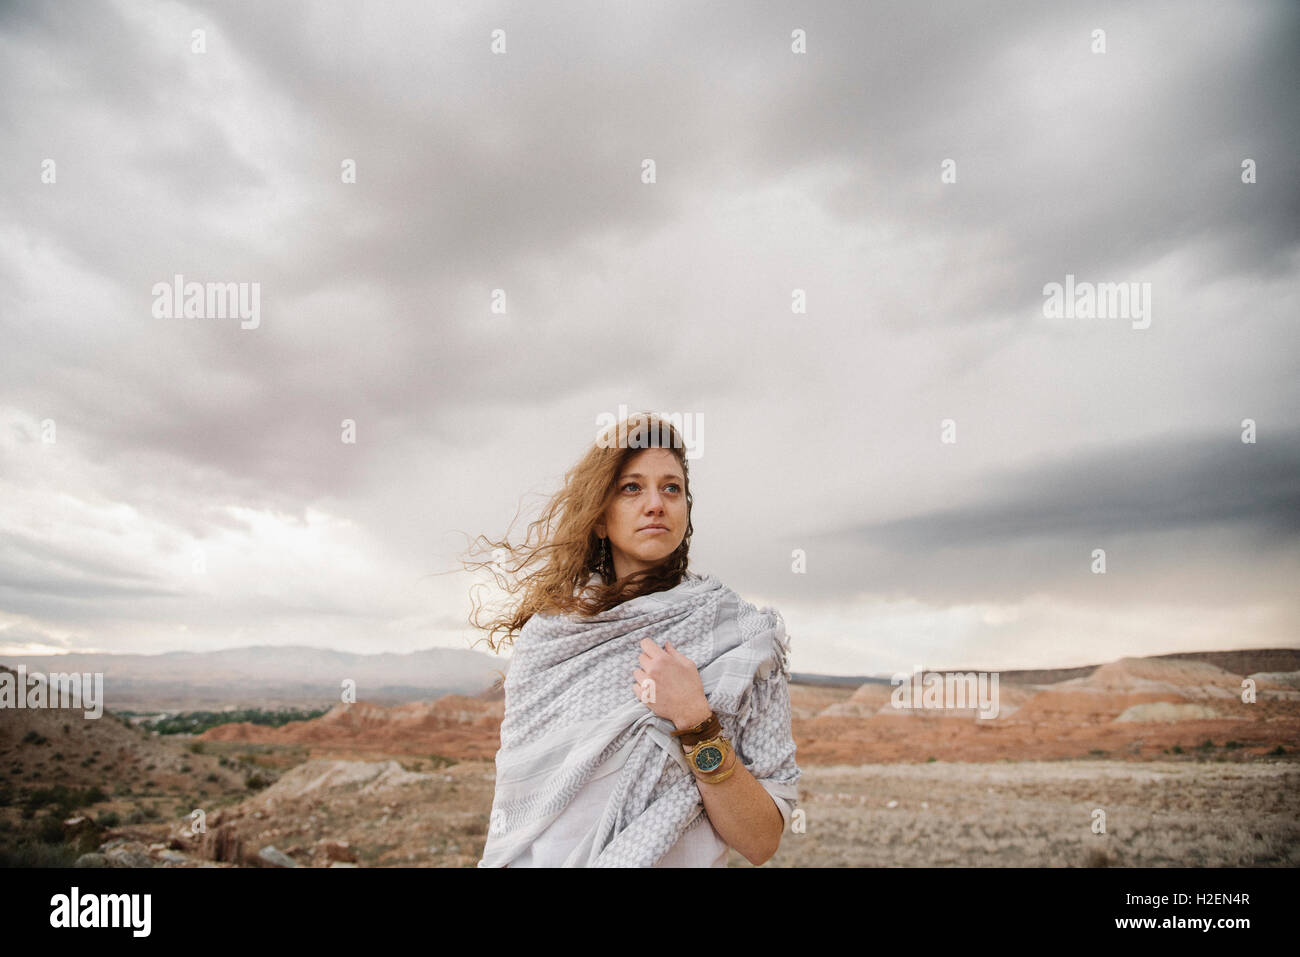 A woman with windblown hair wrapped in a shawl in a desert landscape Stock Photo